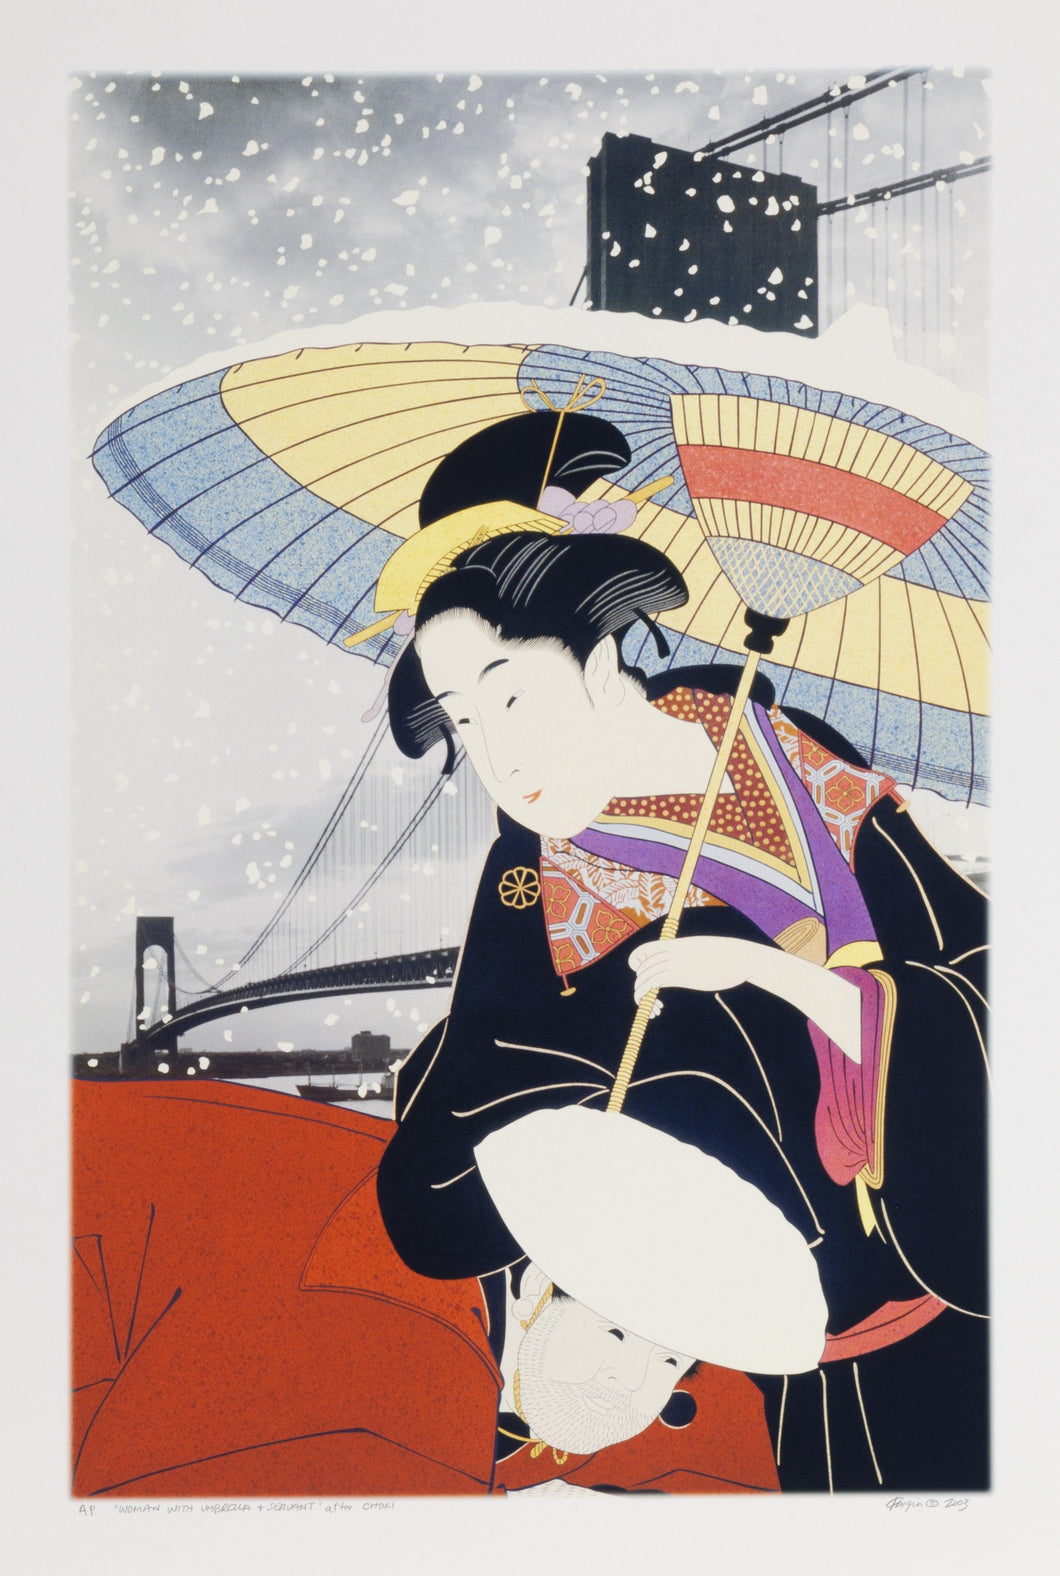 Woman with Umbrella and Servant, after Choki Digital | Michael Knigin,{{product.type}}